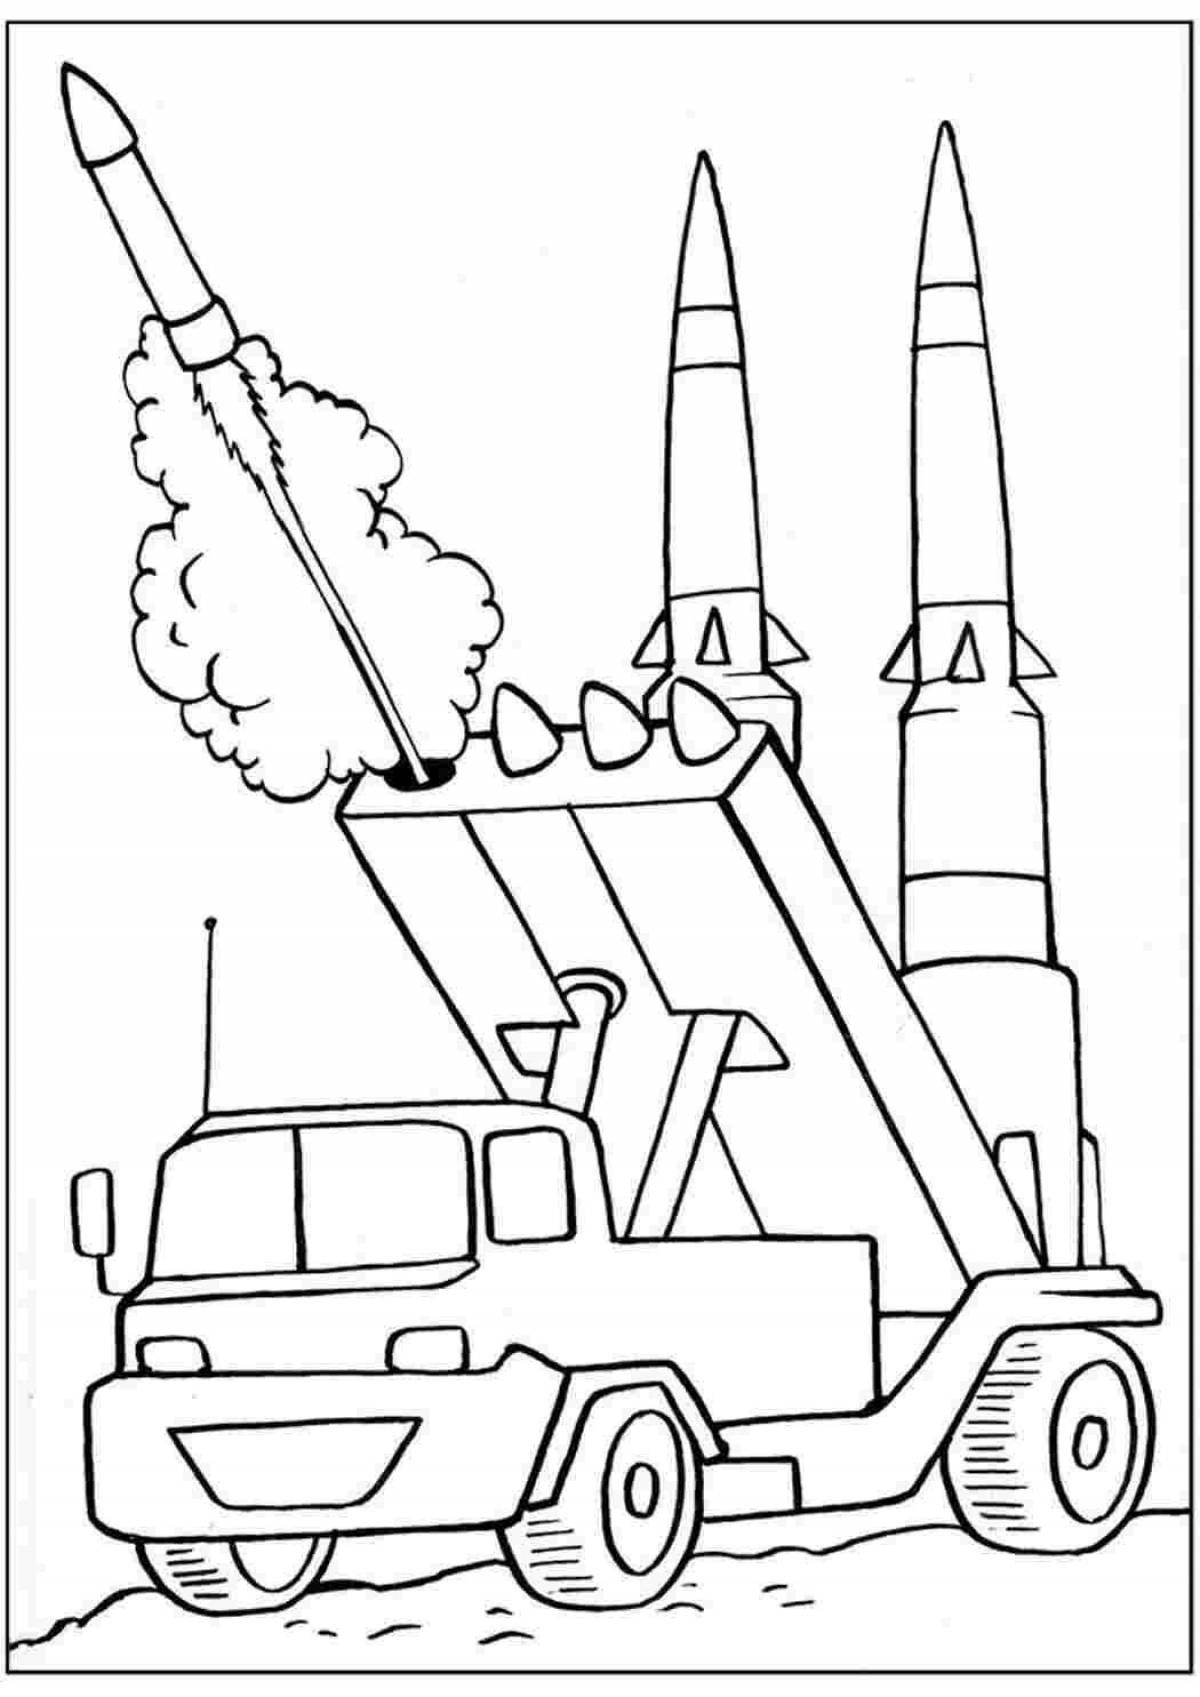 Katyusha military equipment coloring pages for kids